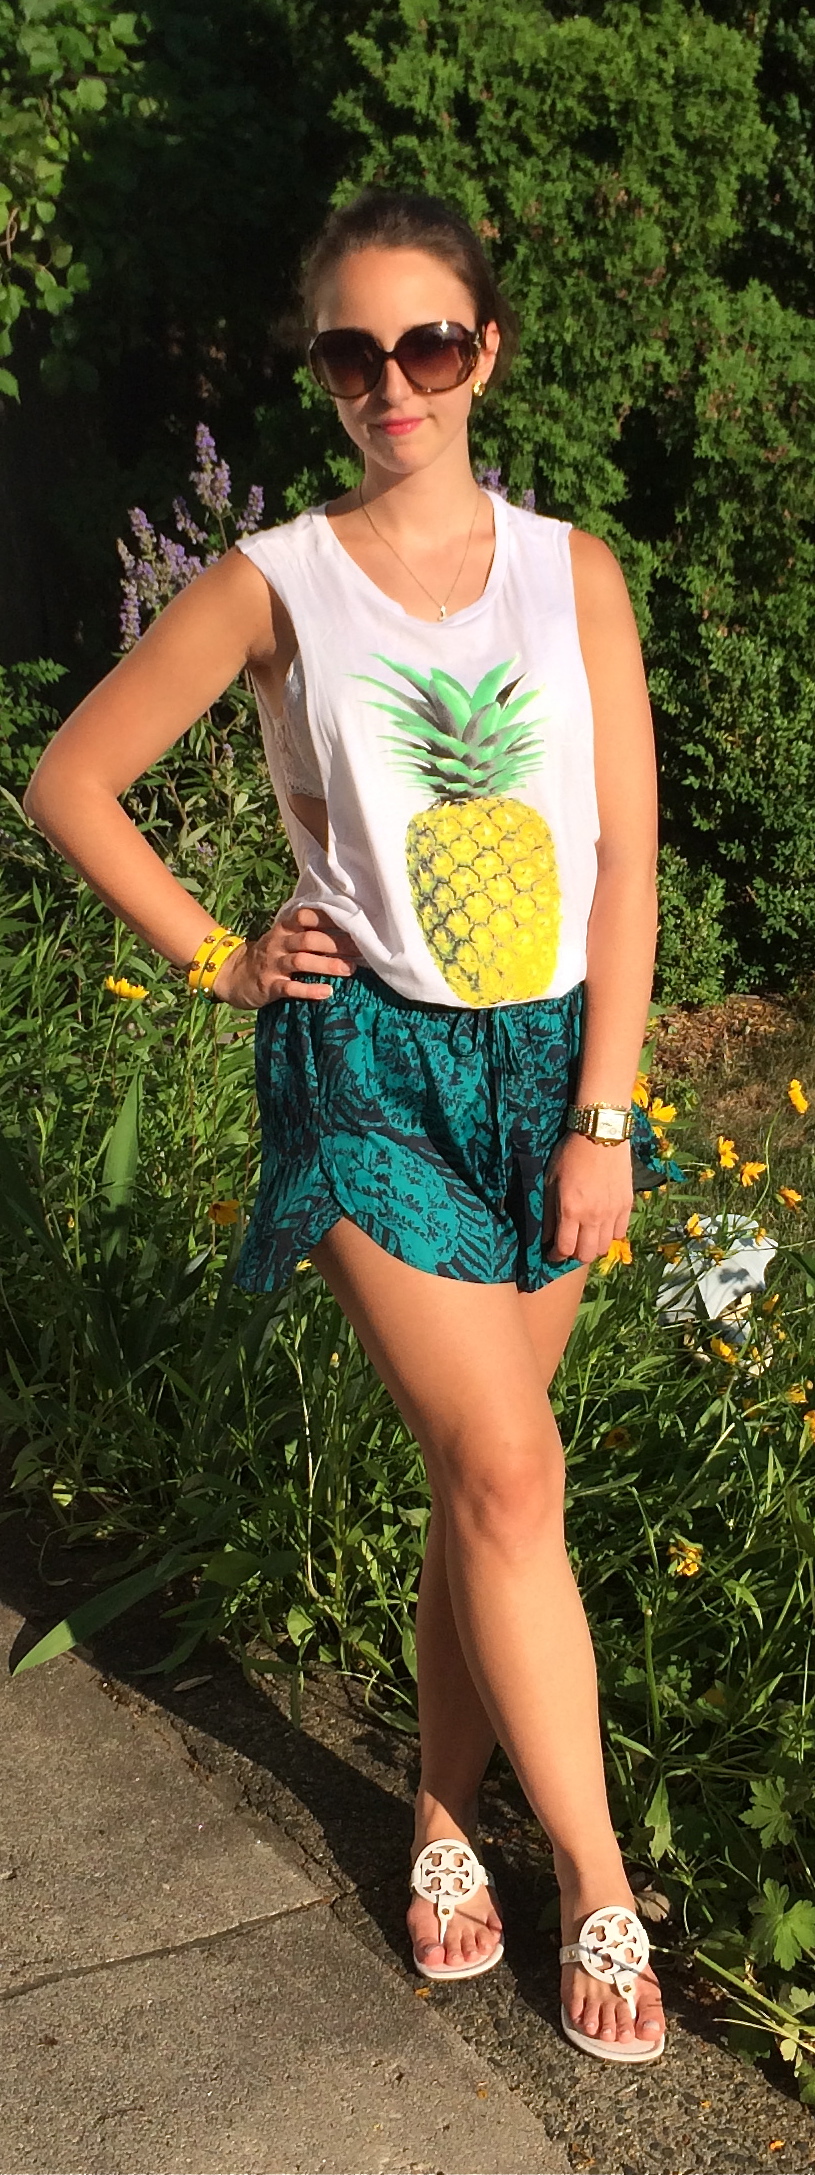 Fashion: Palm Leaves and Pineapples